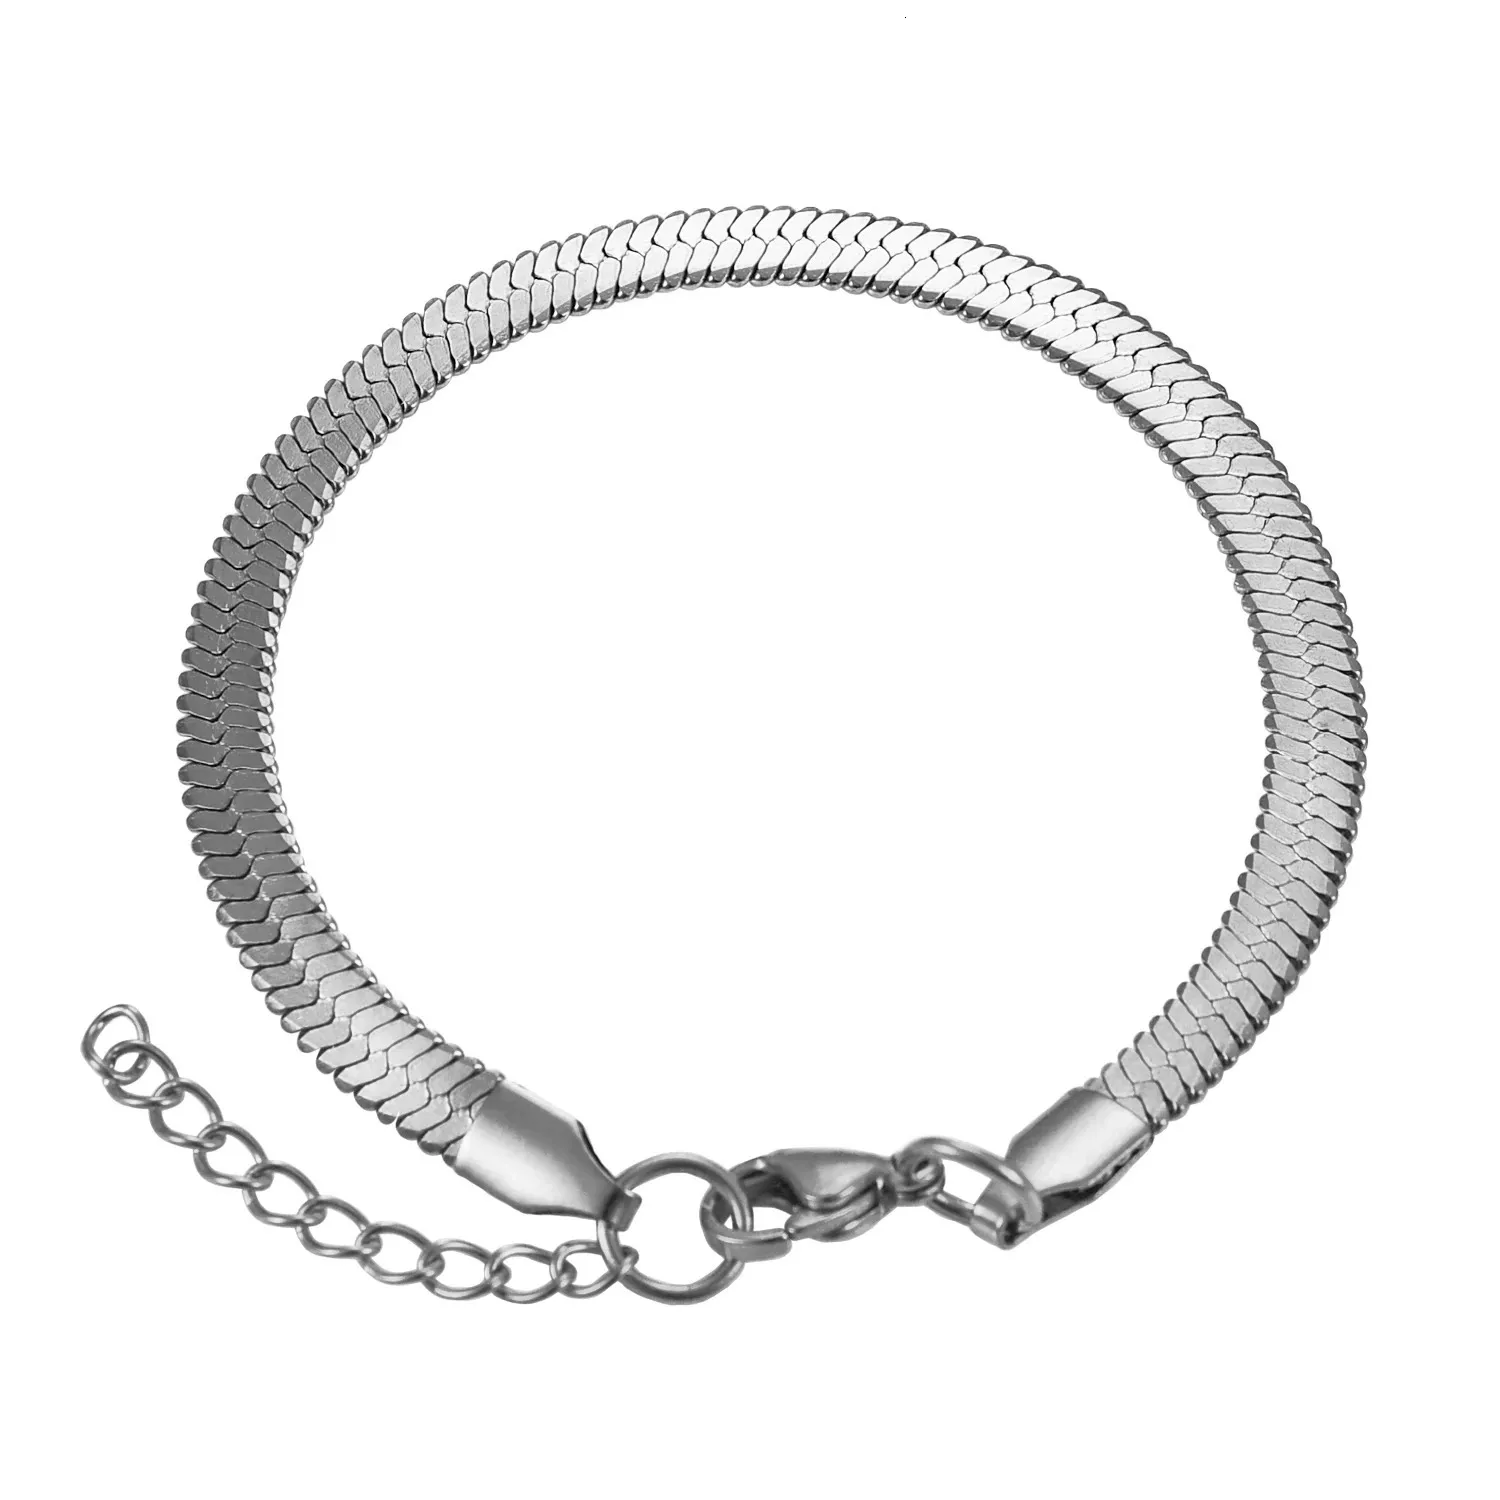 Hip Hop Metal Spring Flat Snake Chain Bracelet Set With U Type Buckle  Fashionable And Versatile Model 239z From Db56, $18.29 | DHgate.Com